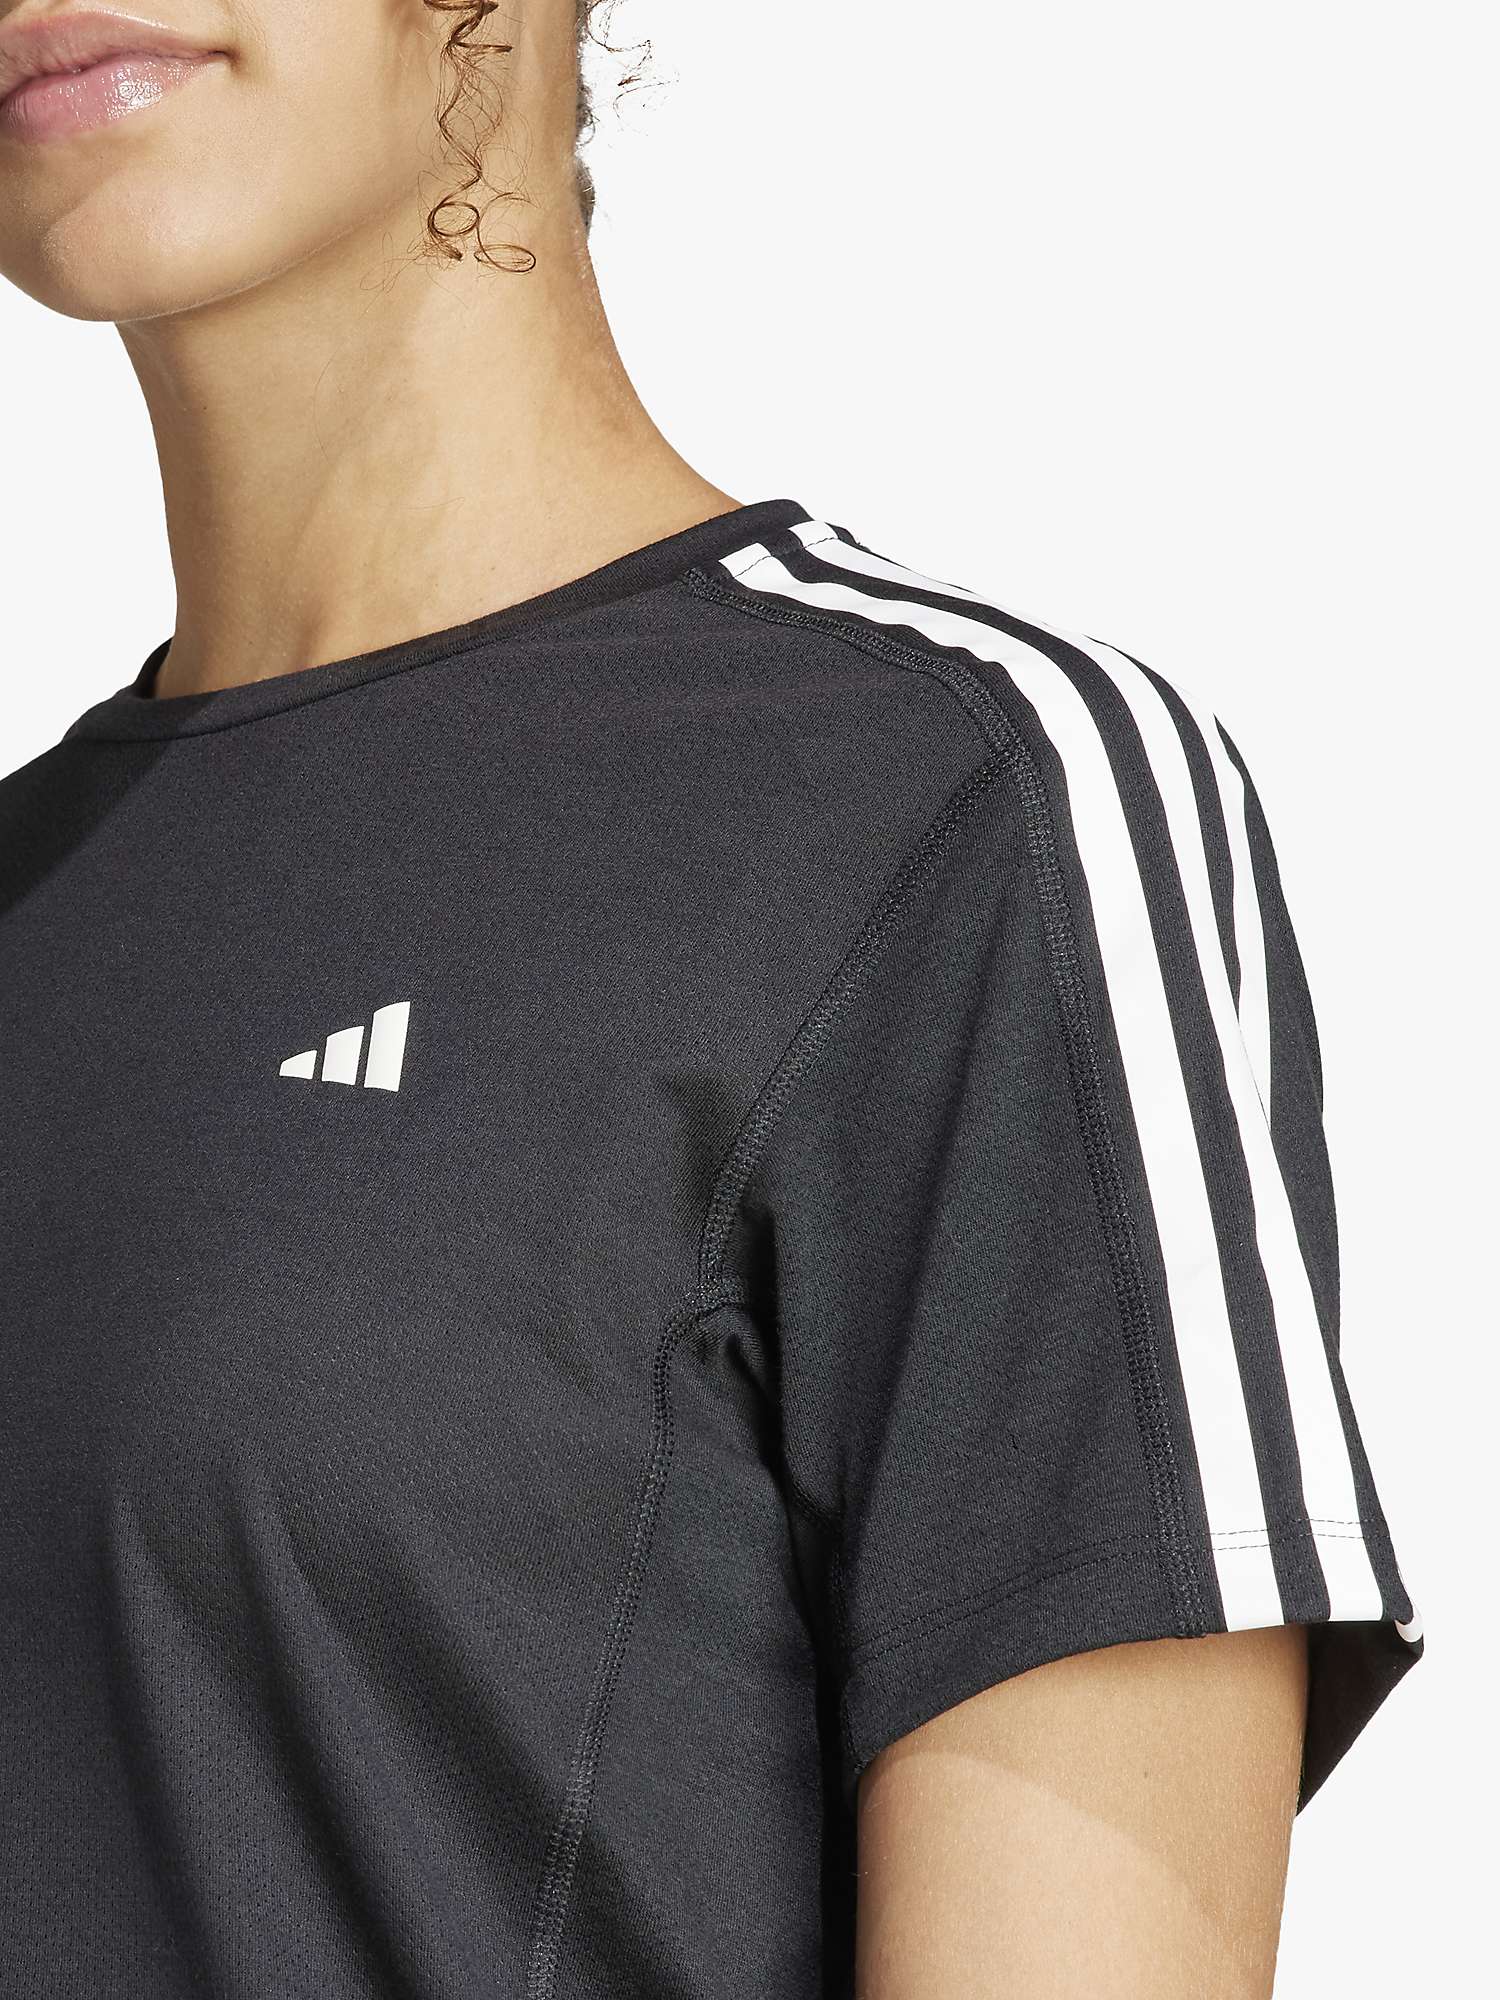 Buy adidas Own The Run 3 Stripes Short Sleeve Recycled Running Top, Black Online at johnlewis.com